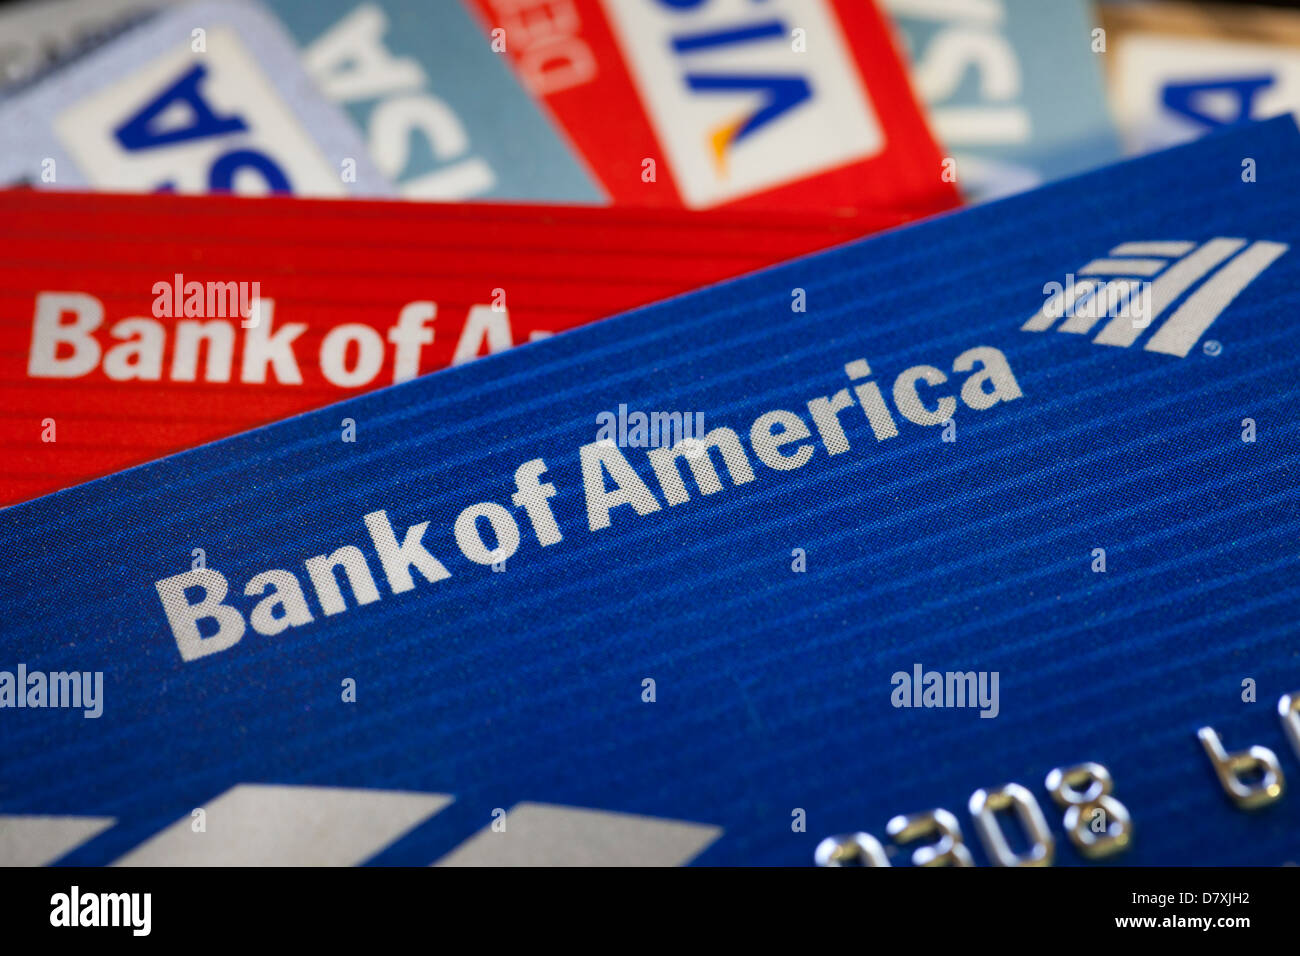 Bank of America credit card Stock Photo